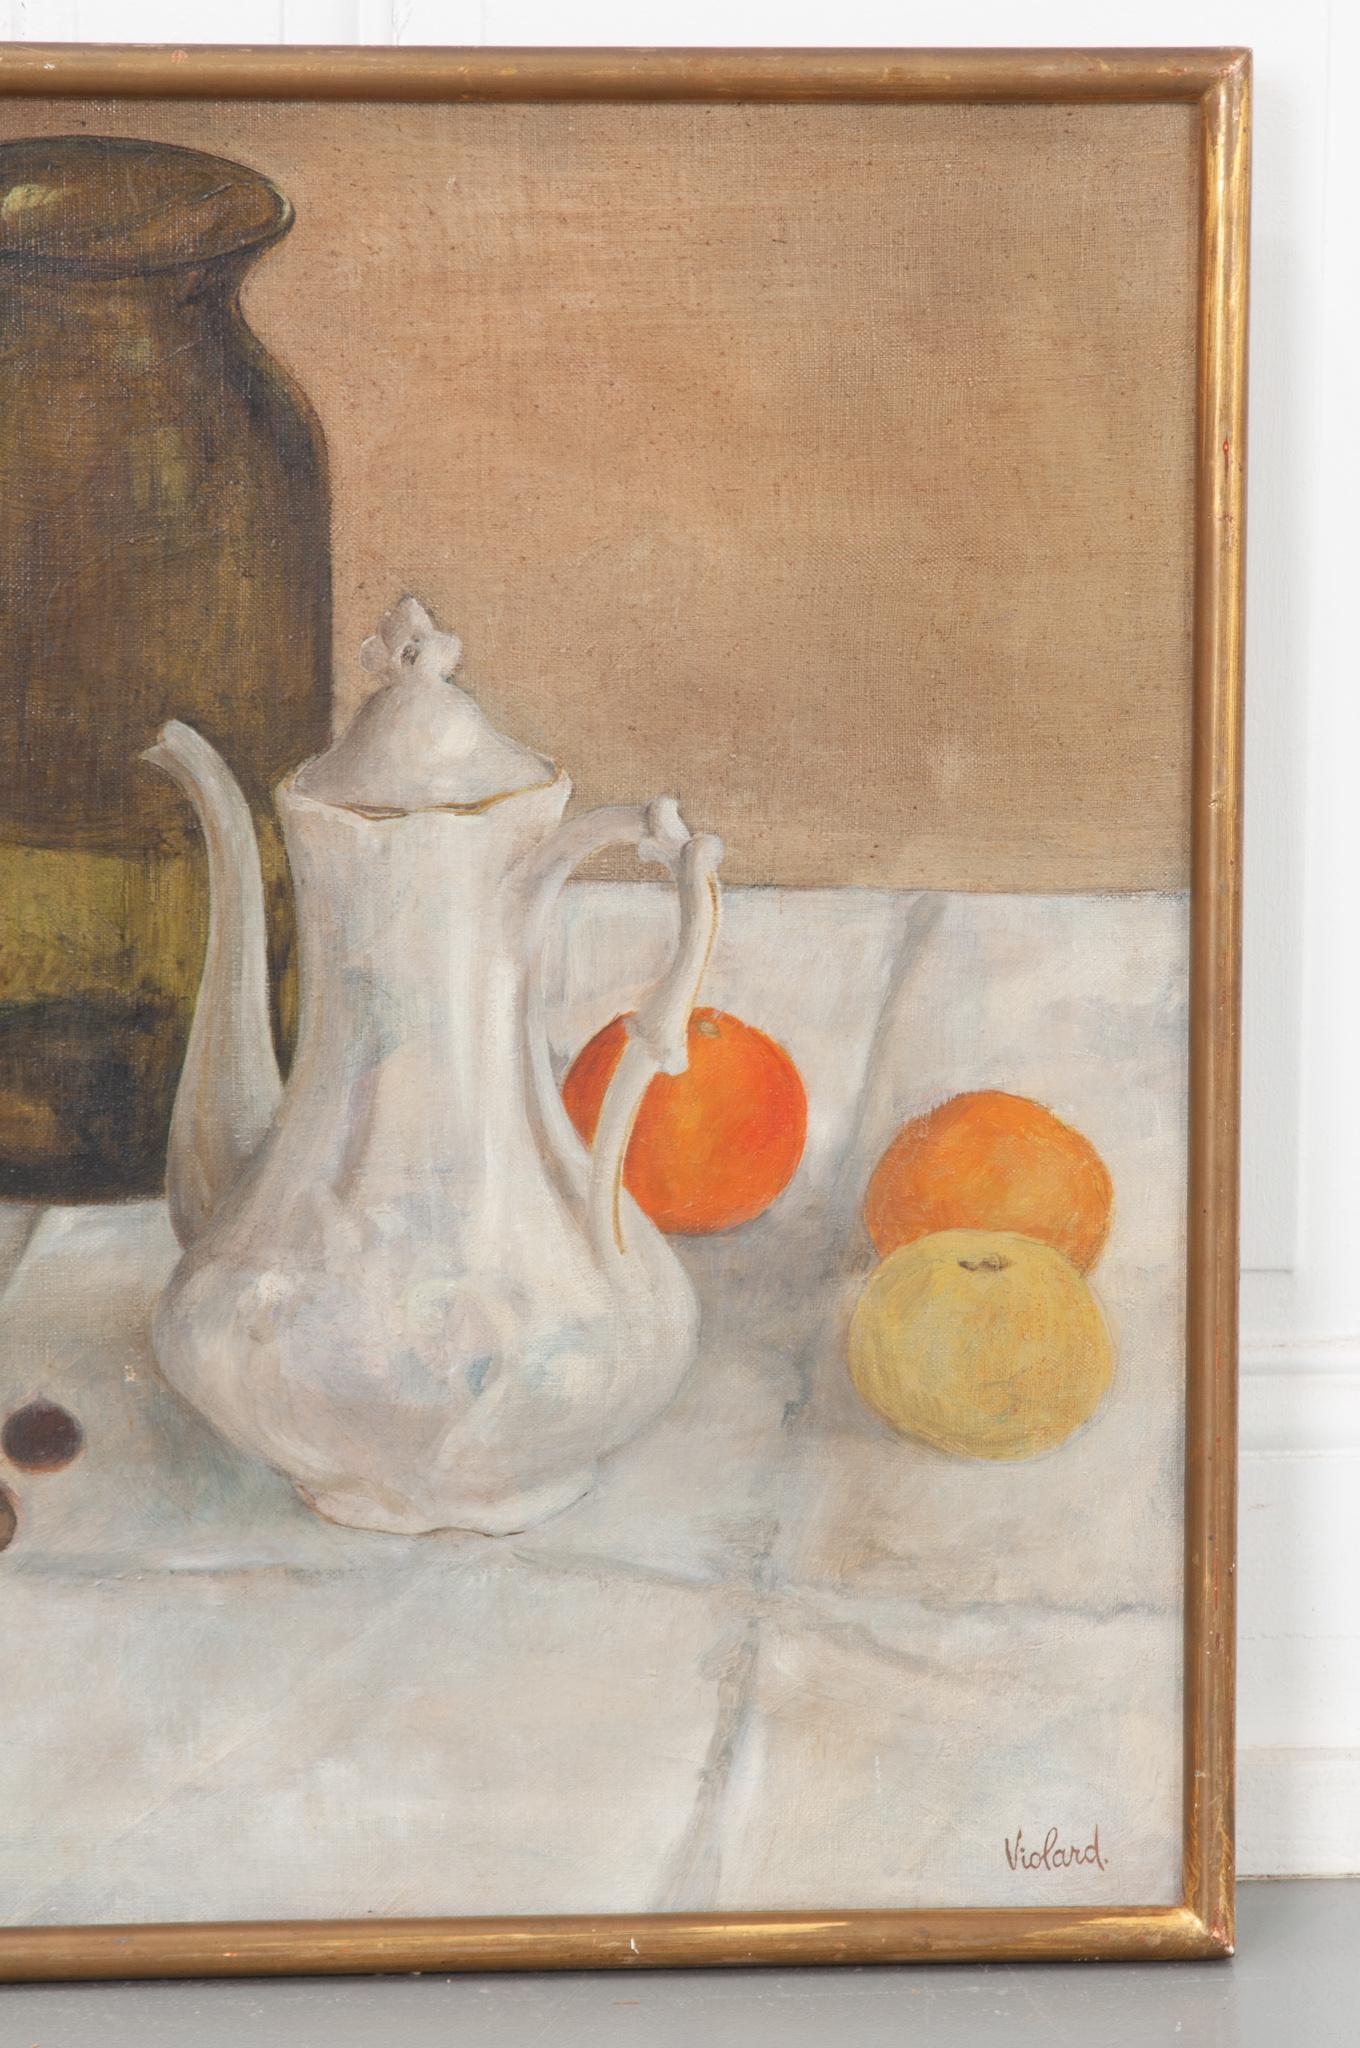 Canvas French Still Life Painting by Violard